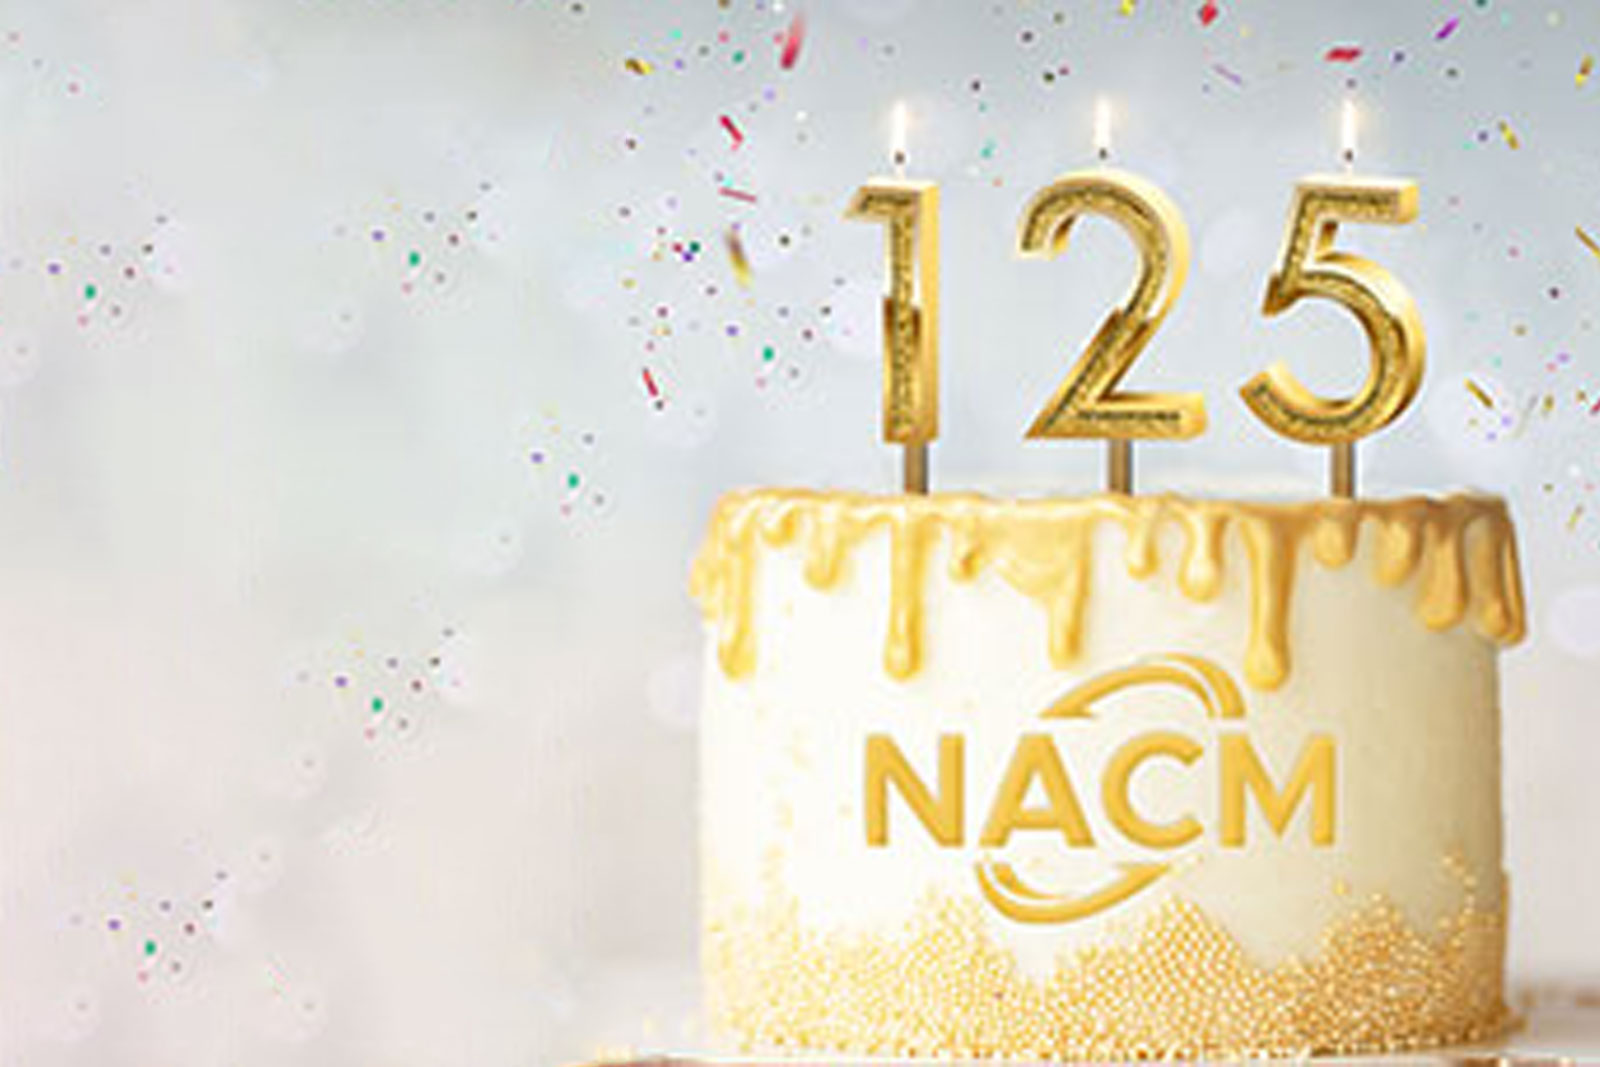 NACM Celebrates 125 Years, Thanks to Members New and Old